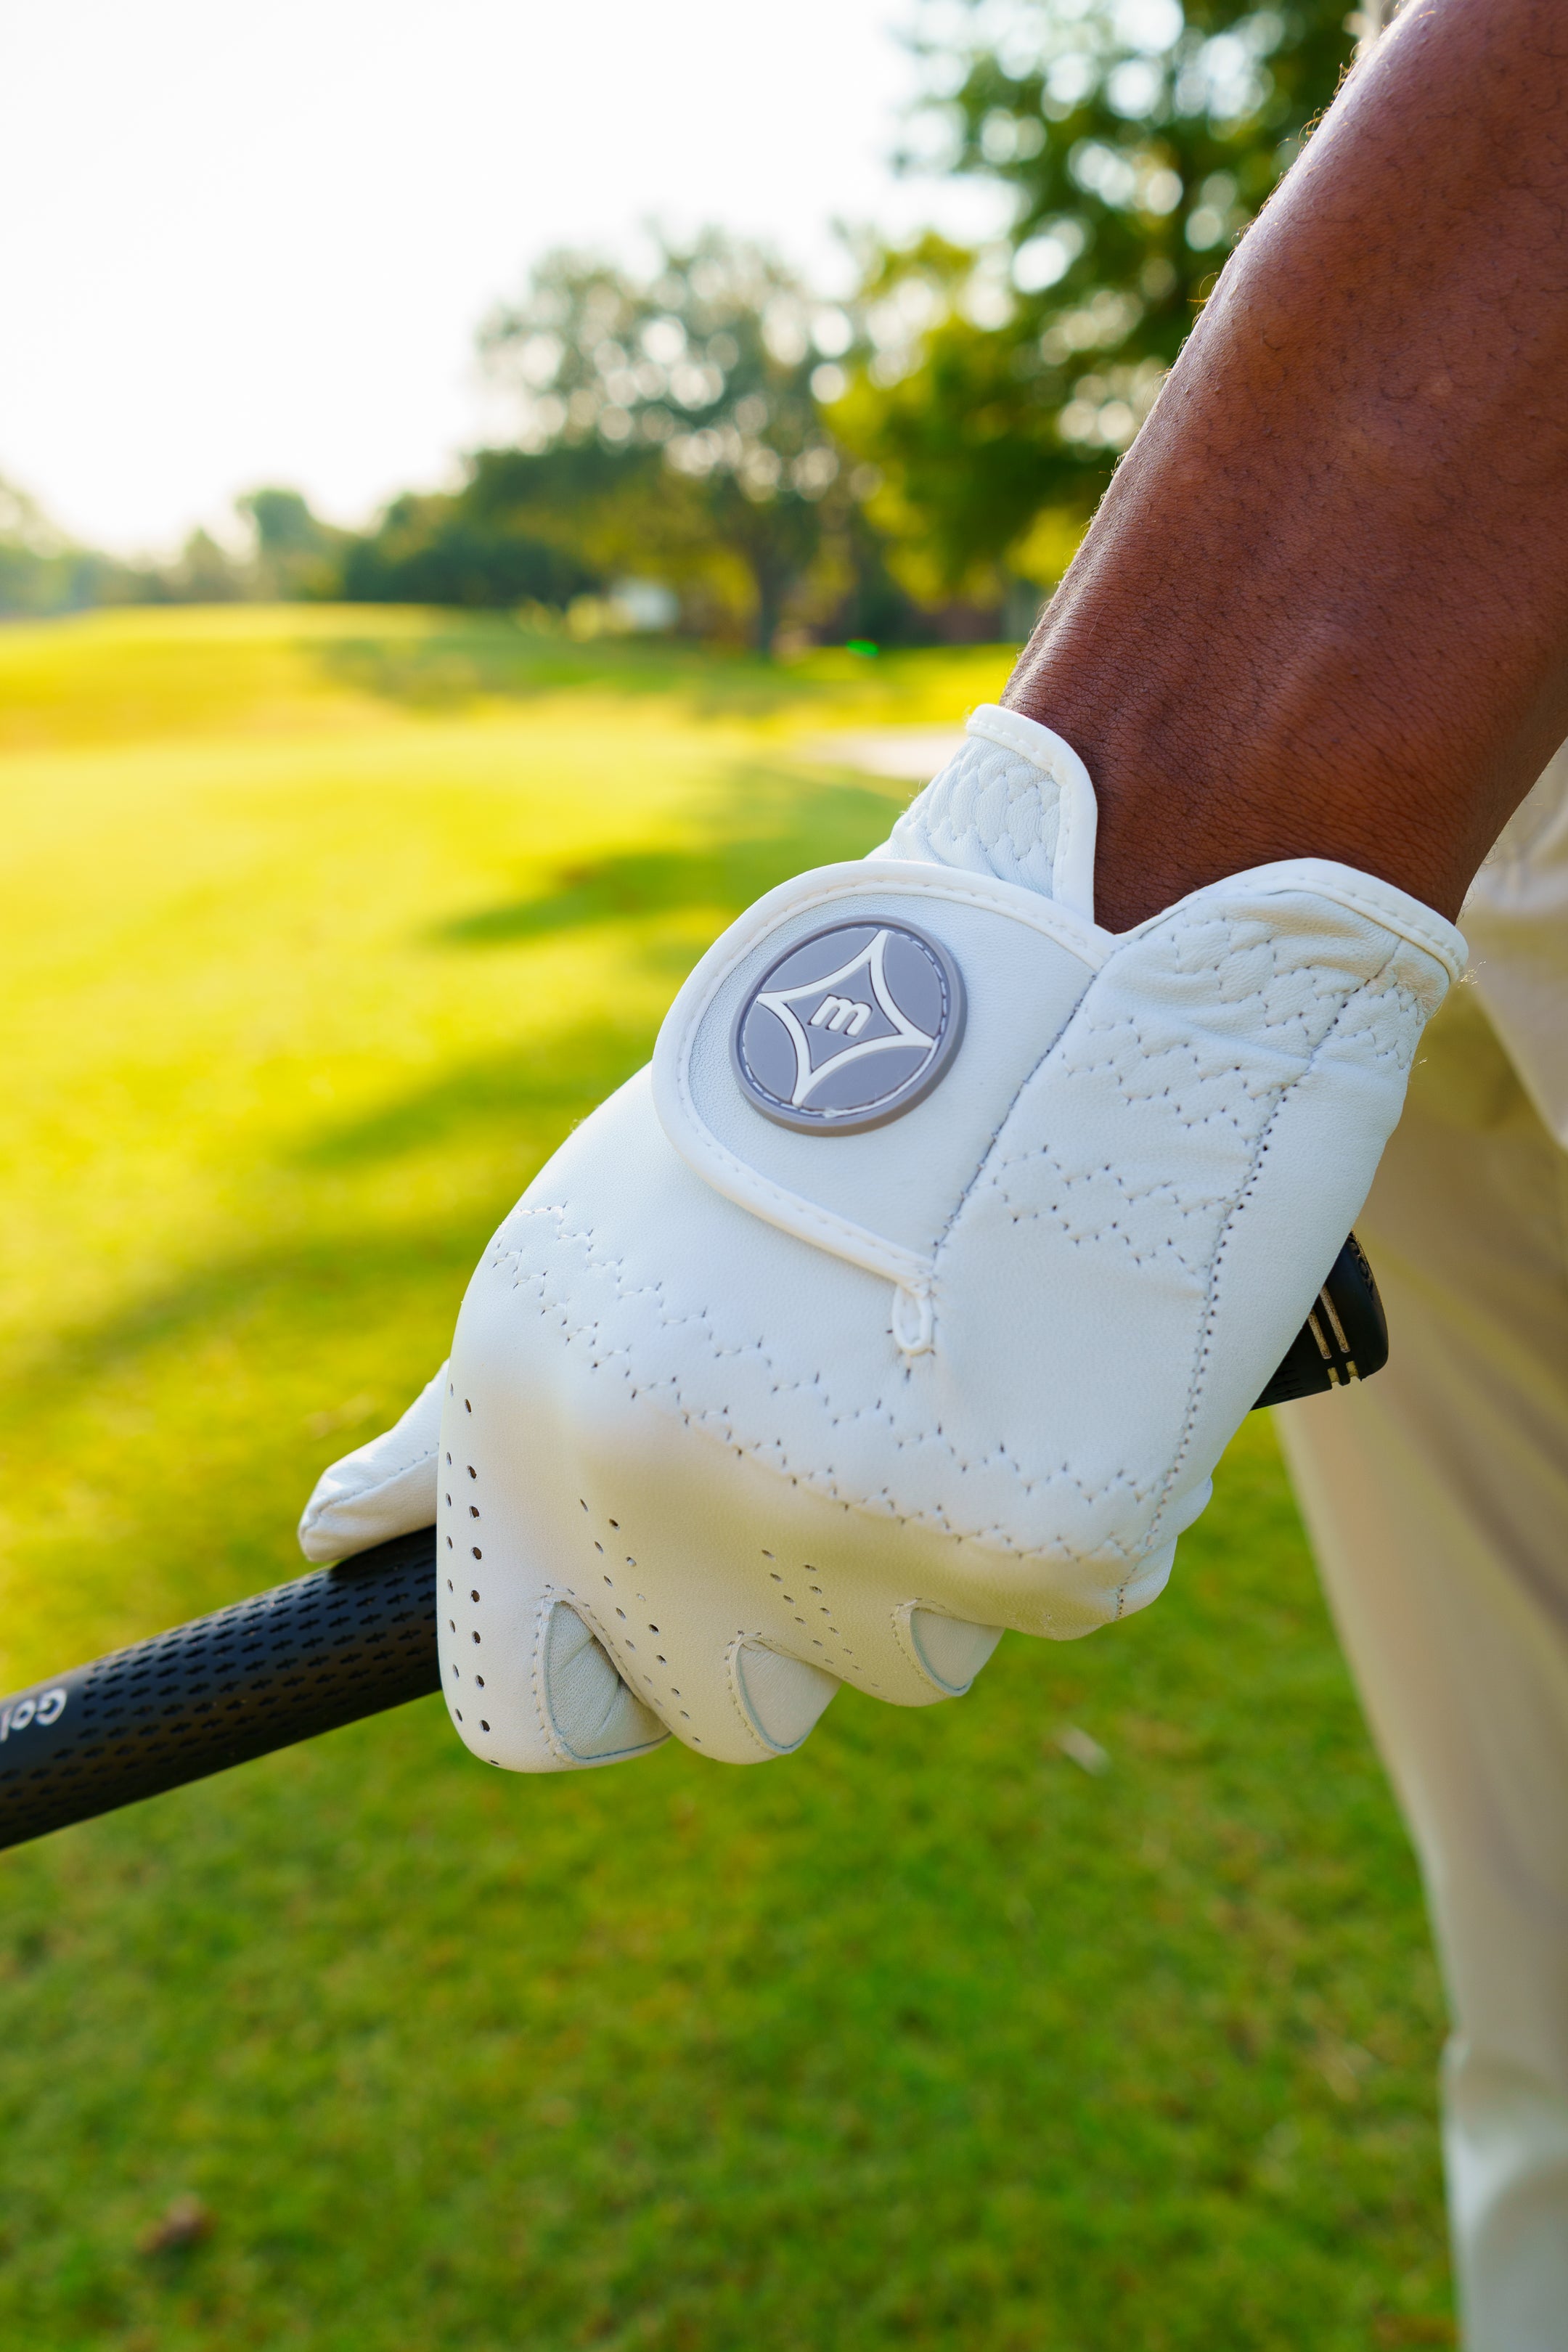 The InTouch Performance Golf Glove – Motier Lafayette